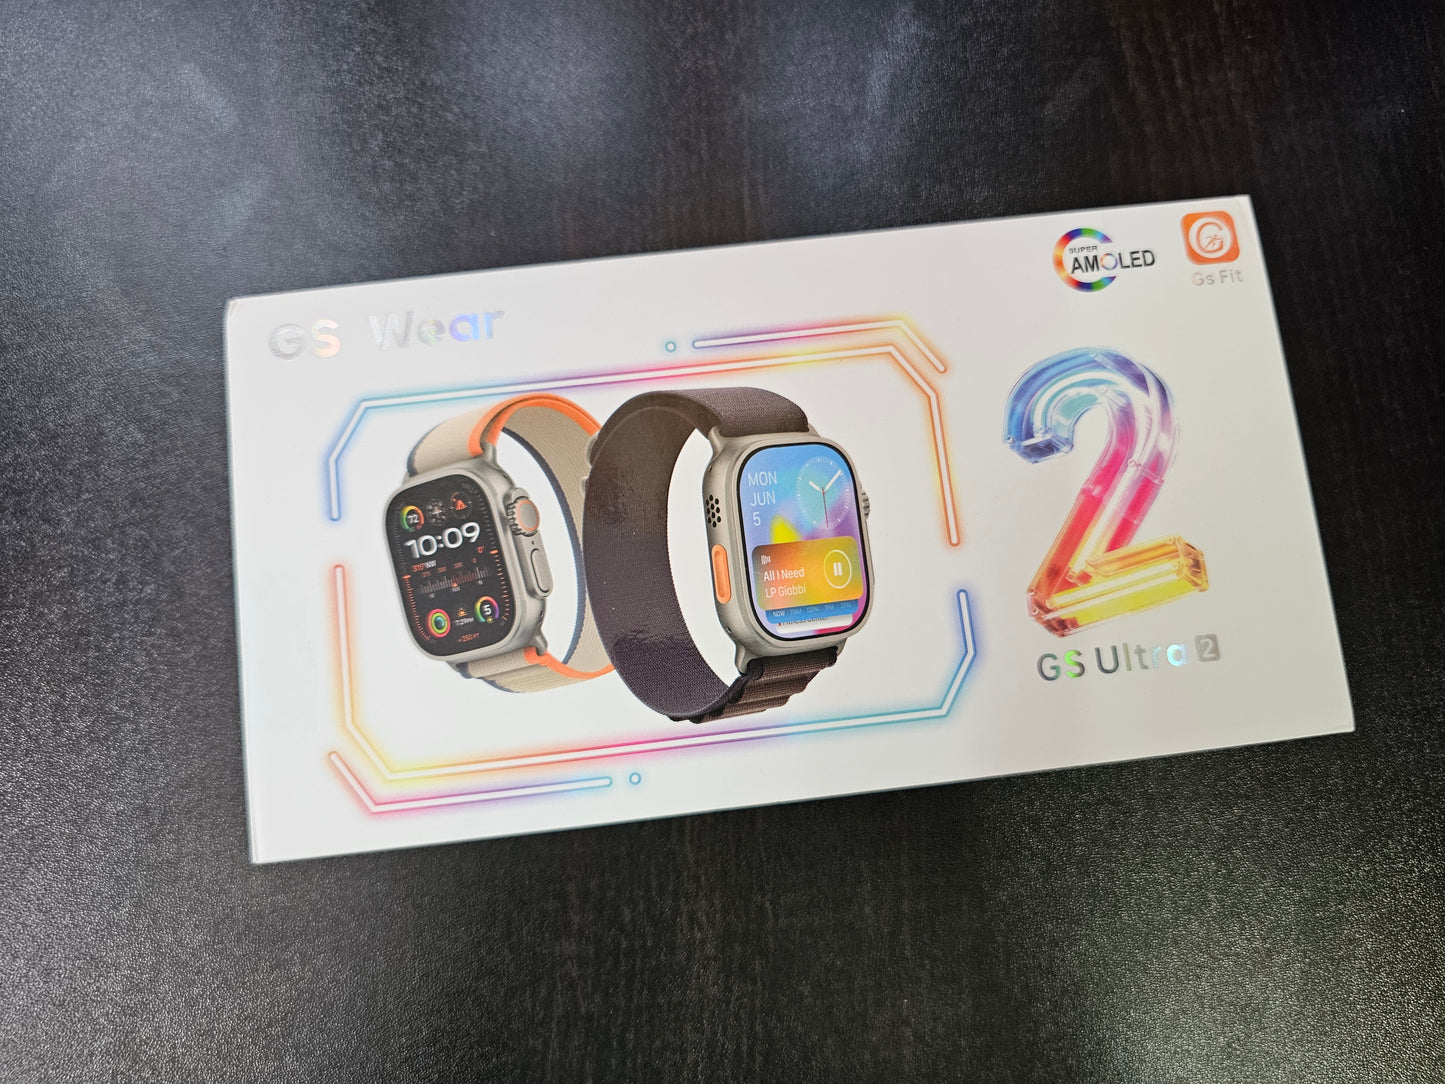 GS Ultra 2 with Amoled display, Chat - GPT, watch OS 10 style software! - Best Apple watch Ultra 2 Clone